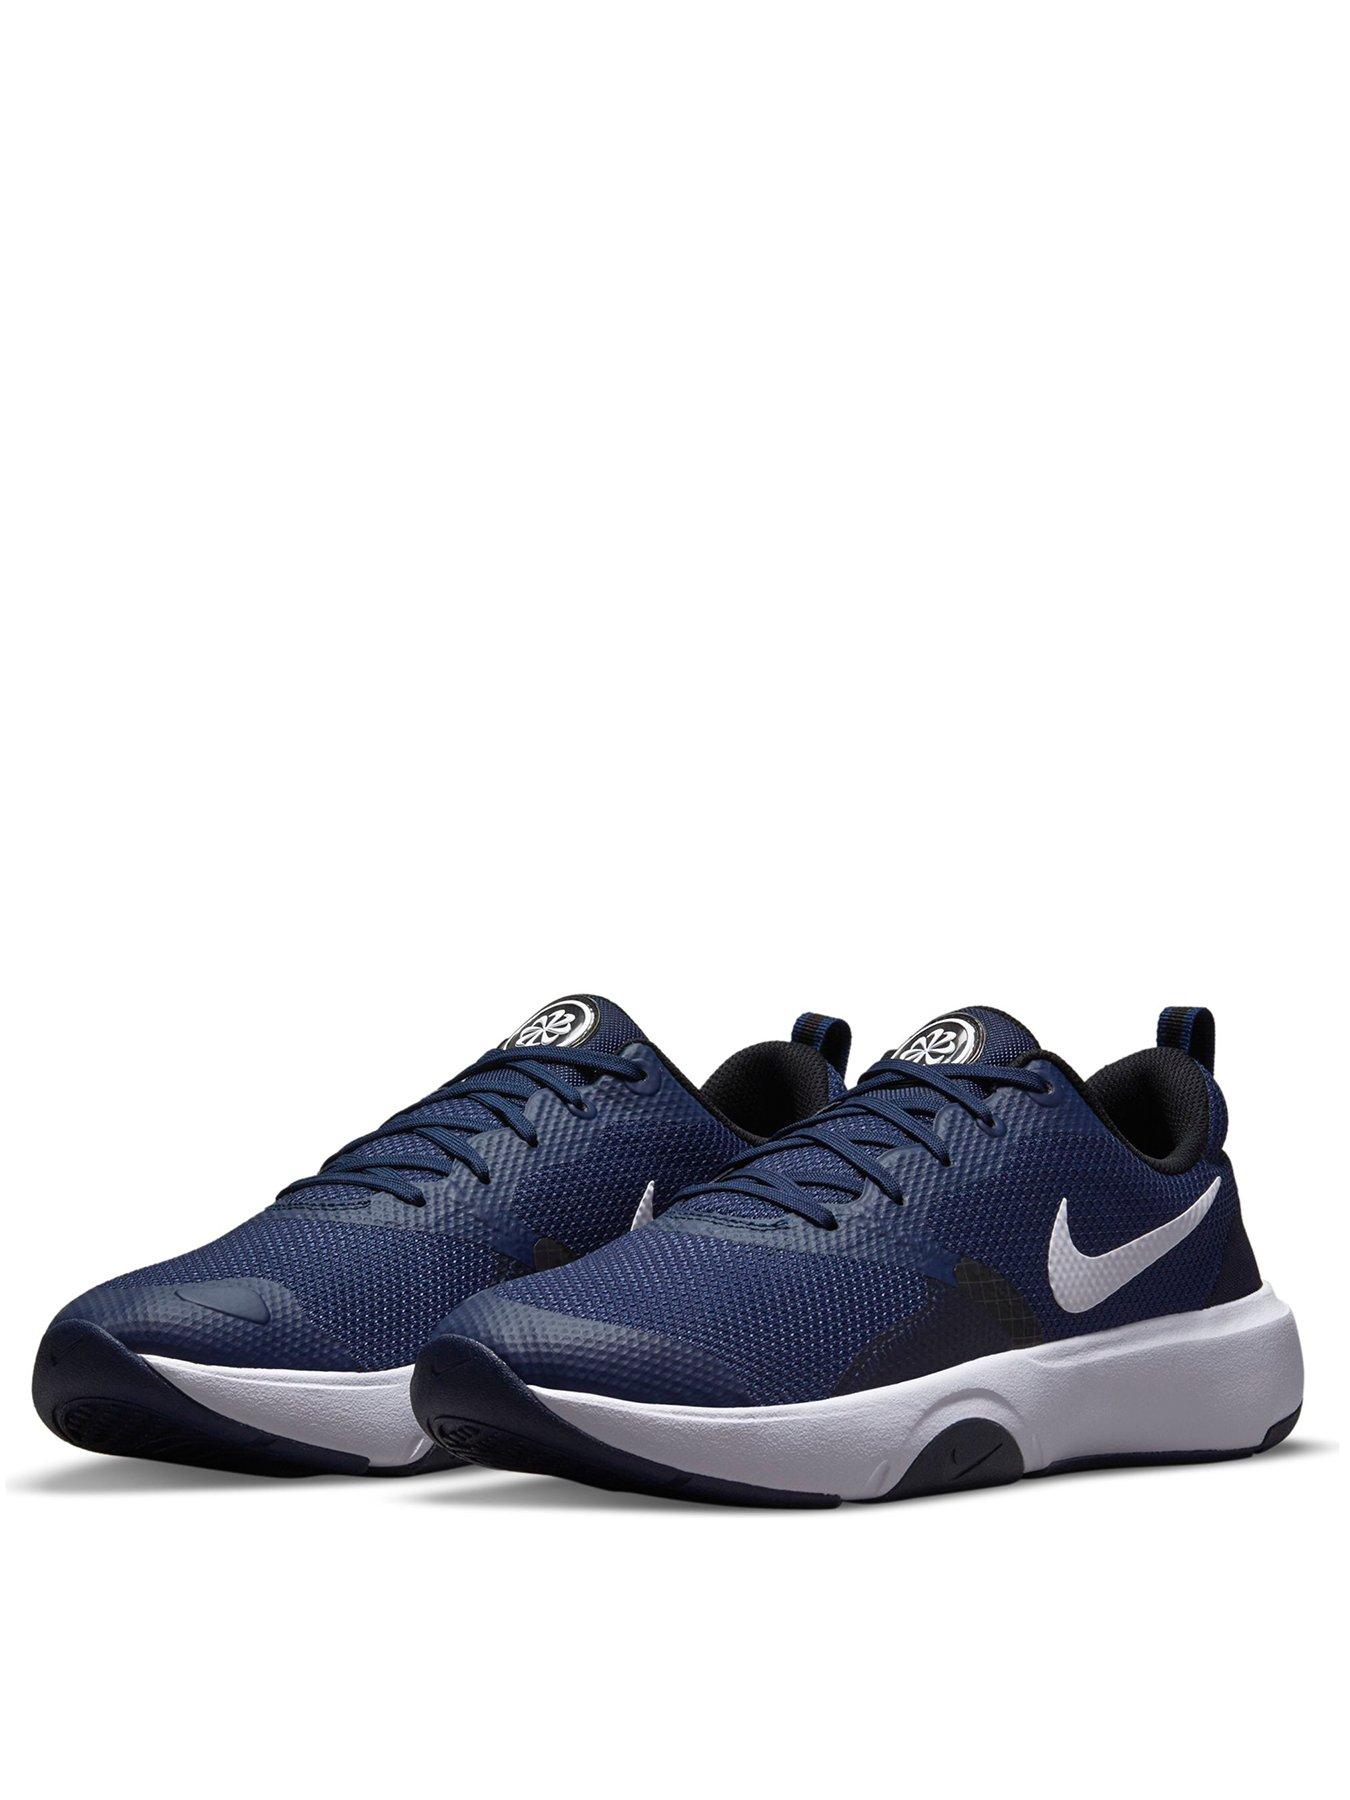 12 | Nike City Rep Tr | Shop All | Mens sports shoes | Sports & leisure ...